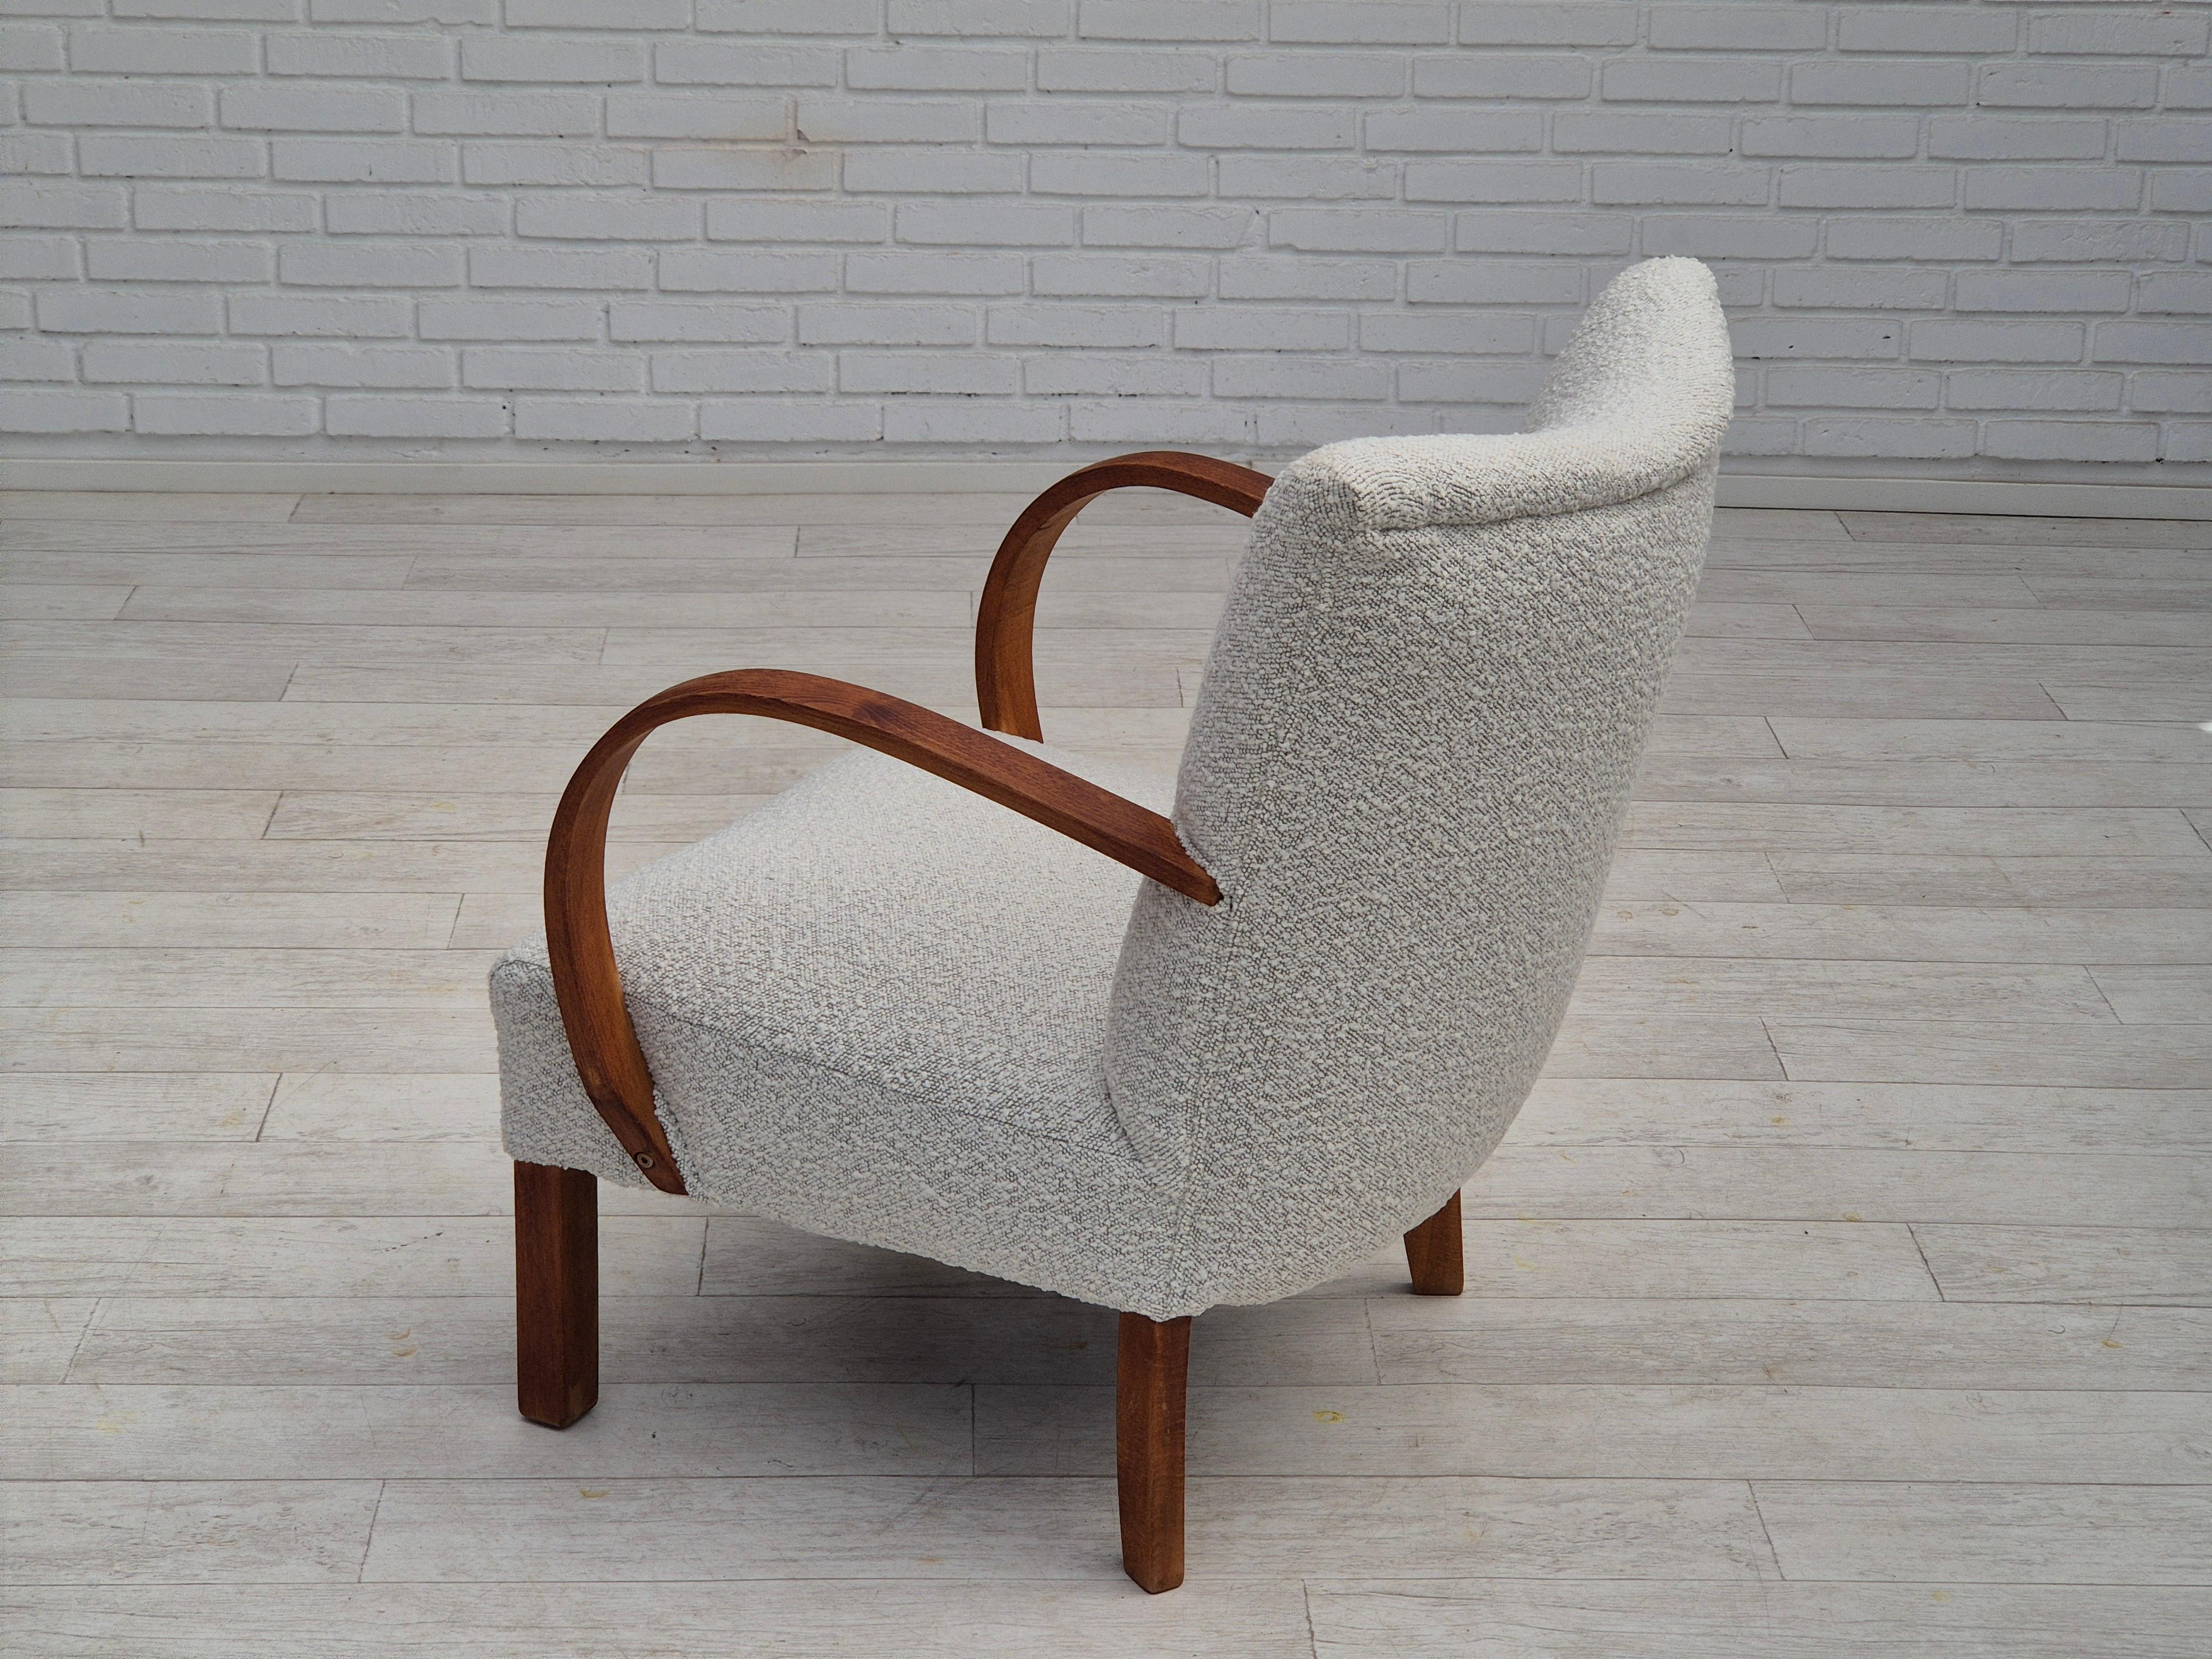 1960s, reupholstered Danish art-deco armchair, beech wood, leather. For Sale 10